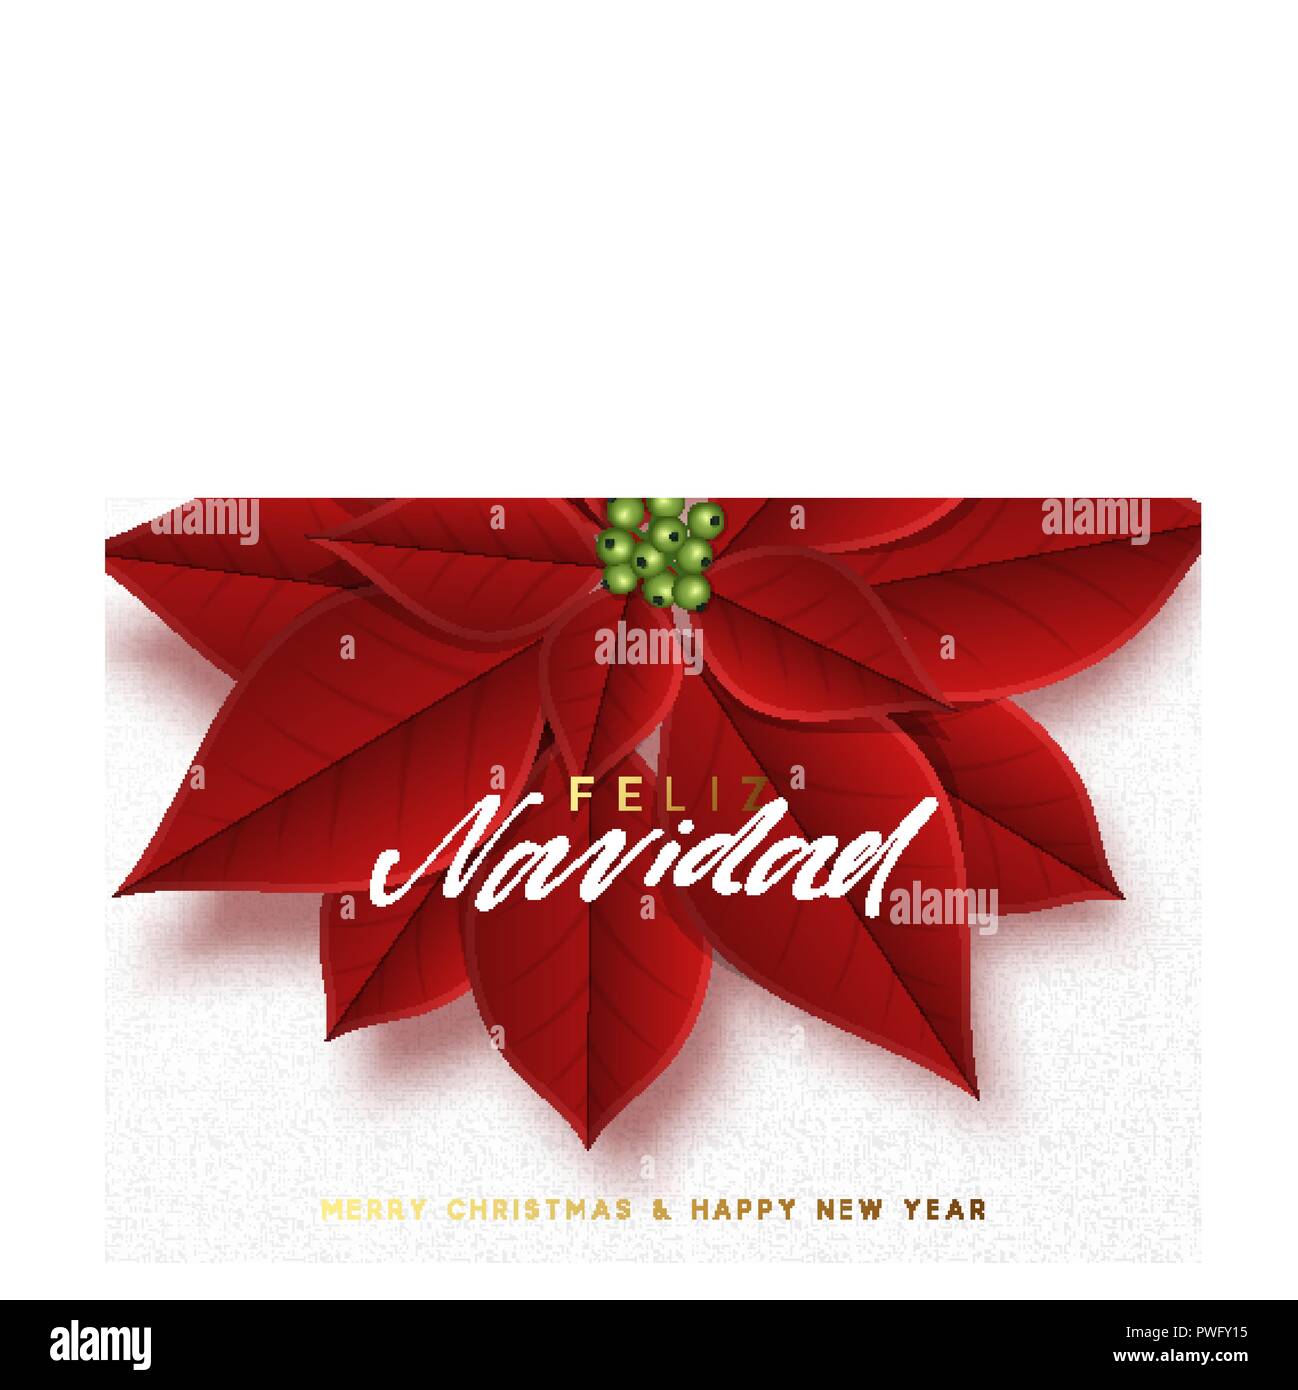 Merry Christmas, background decorated with beautiful red buds poinsettia flowers. Spanish text Feliz Navidad Stock Vector